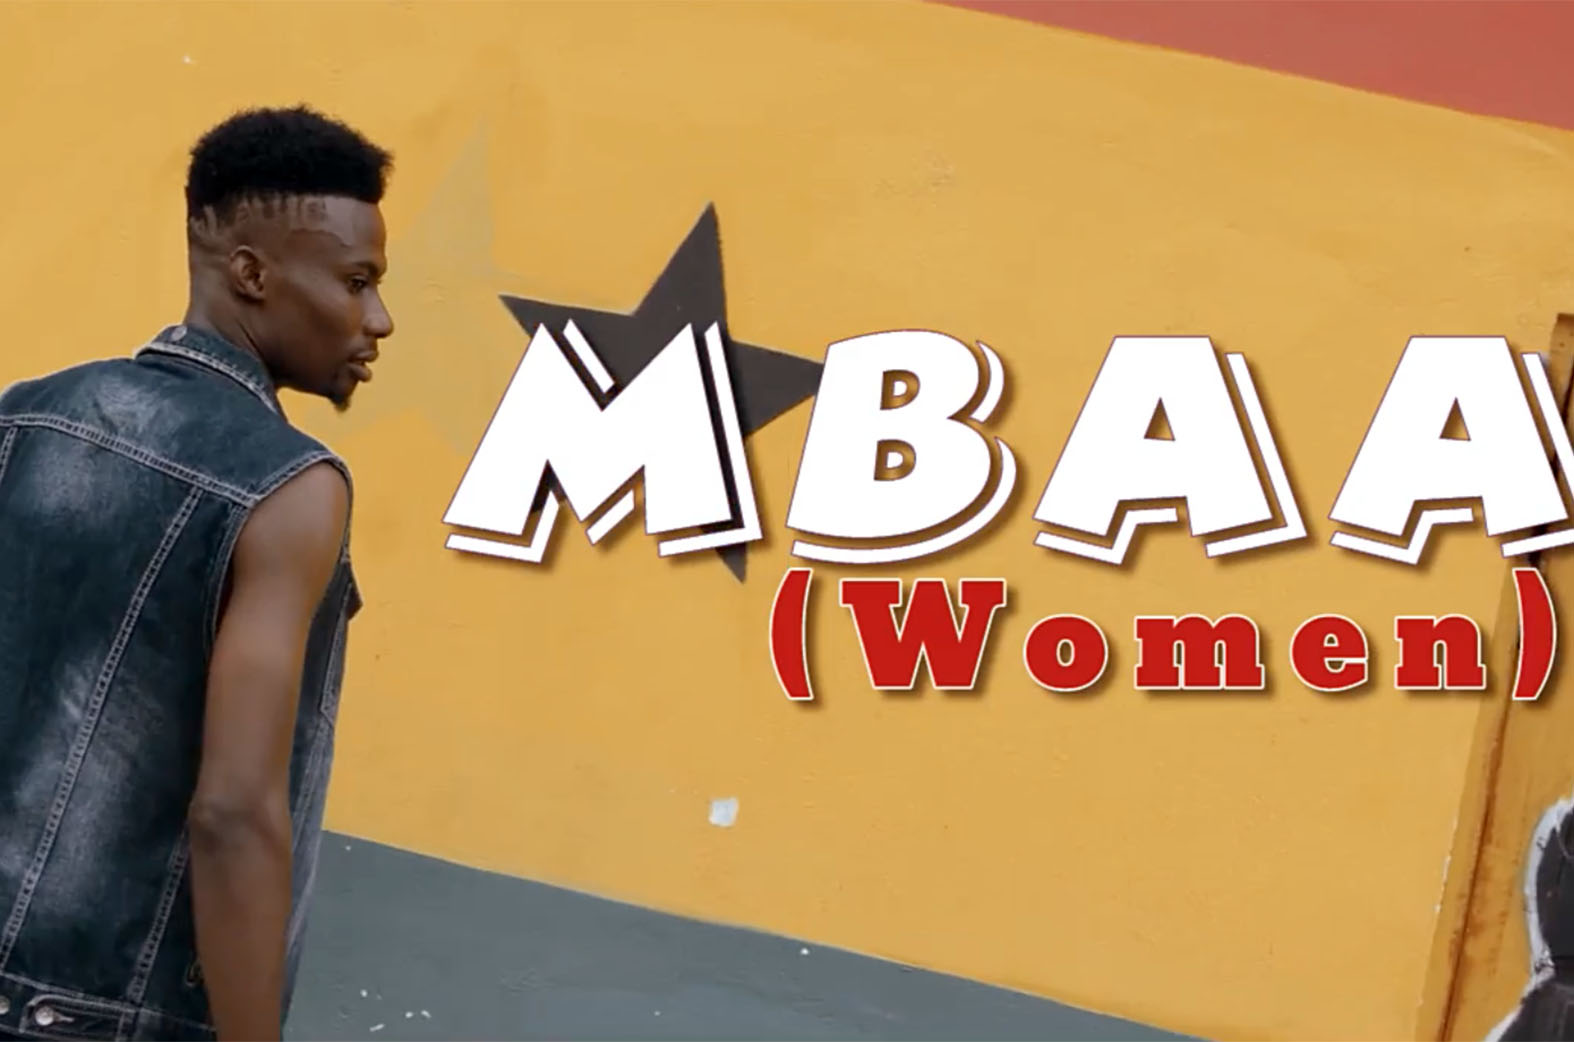 Video: Mbaa by Louis 1